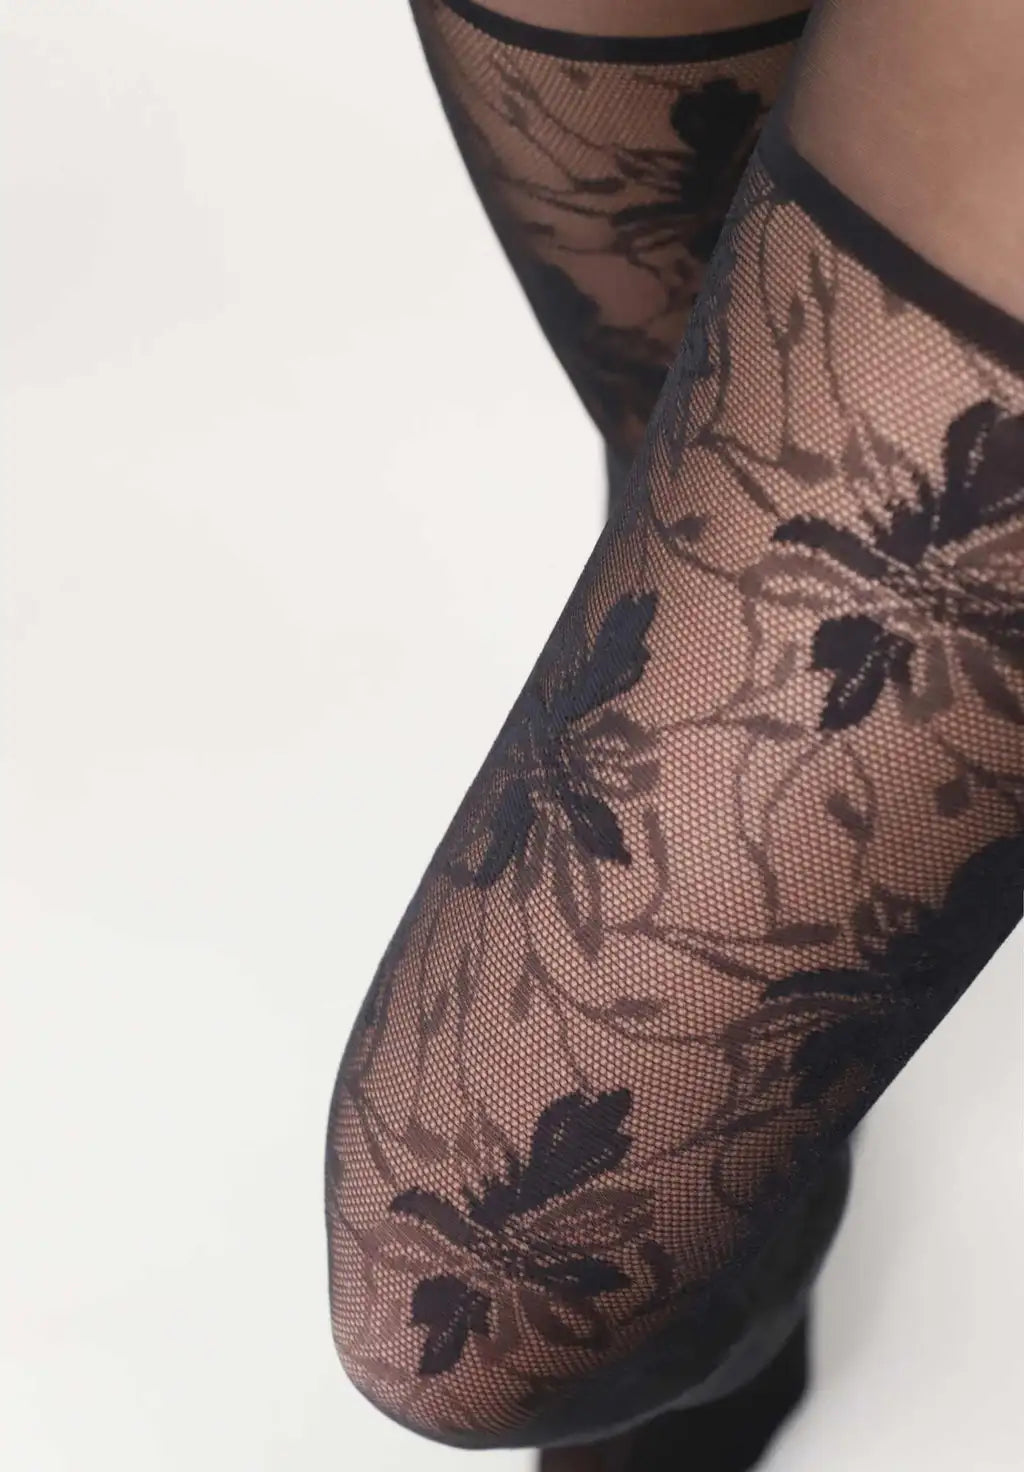 Oroblù Shock Up Lace - Black semi-sheer fashion tights with a floral lace pattern up to the thigh, shaping push-up panty control-top